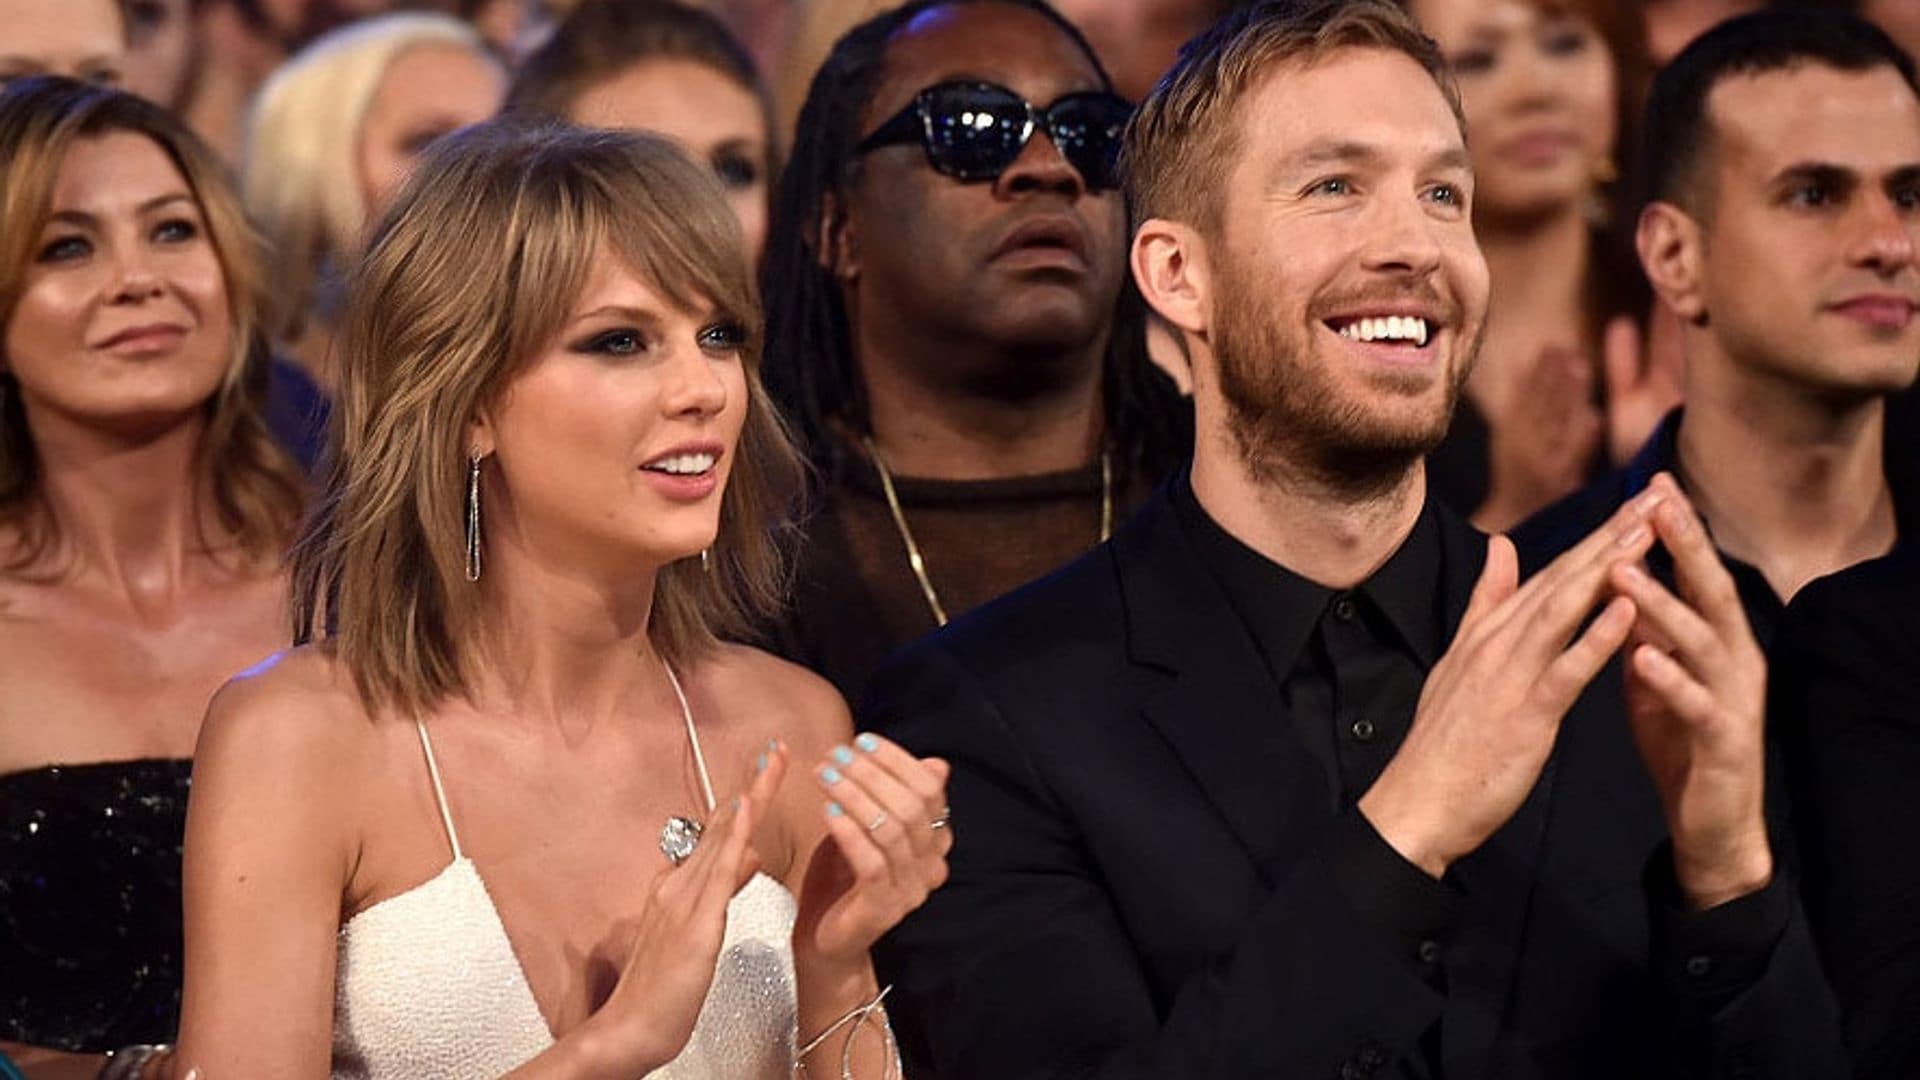 Taylor Swift and Calvin Harris break up after 15 months